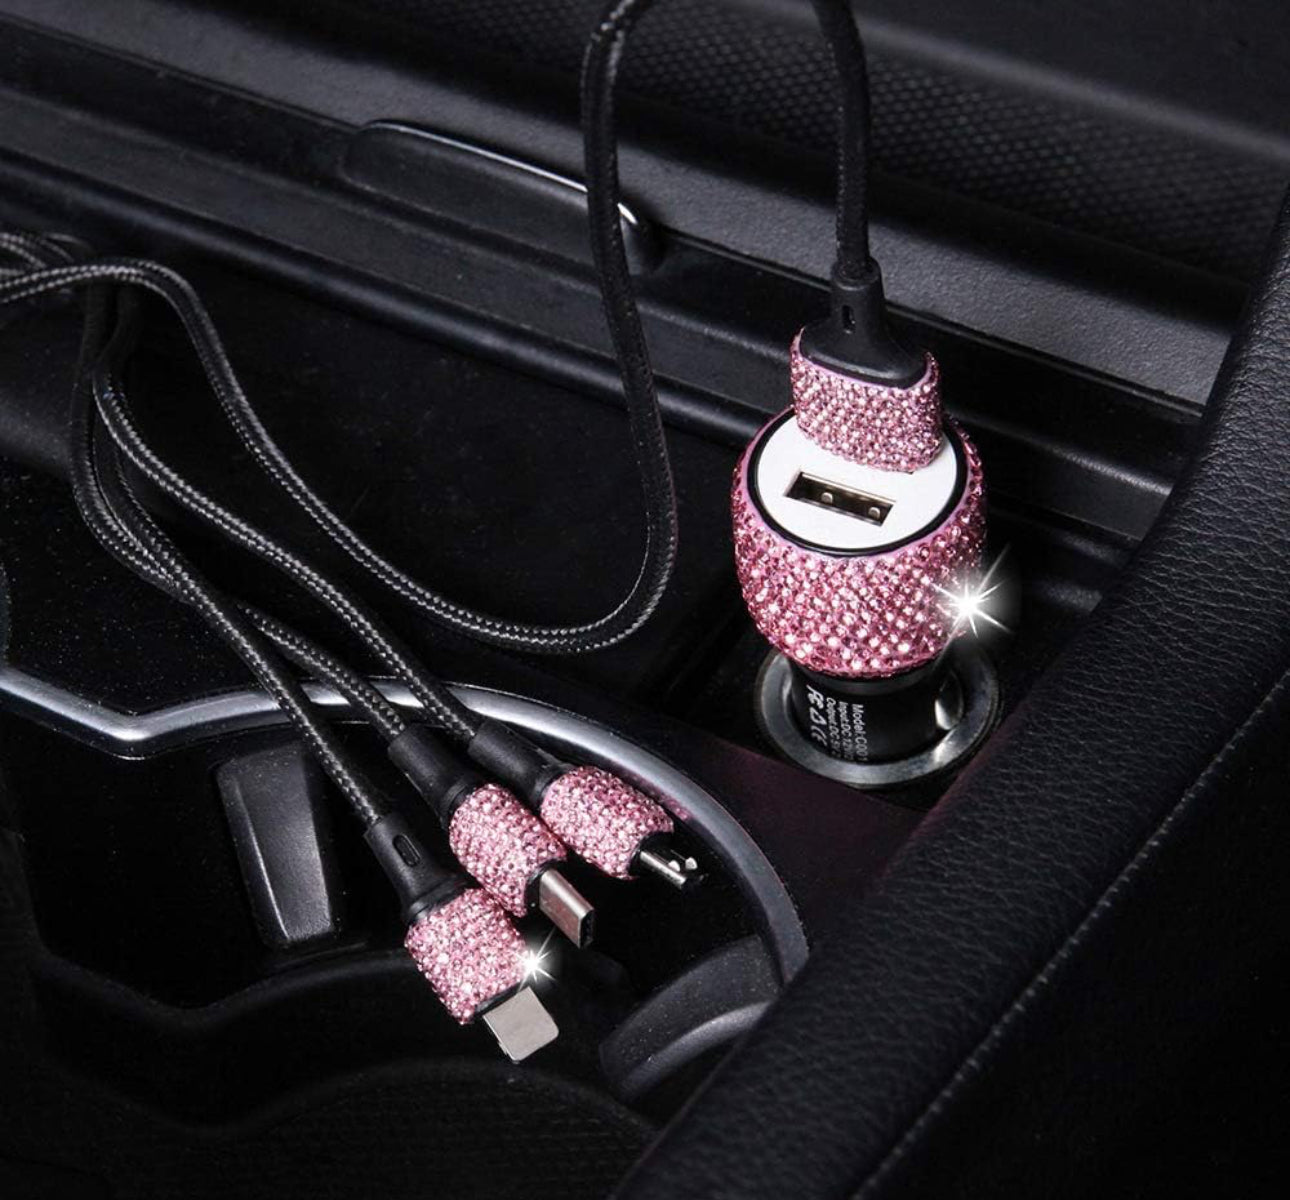 Blinged out car USB 3 way charger